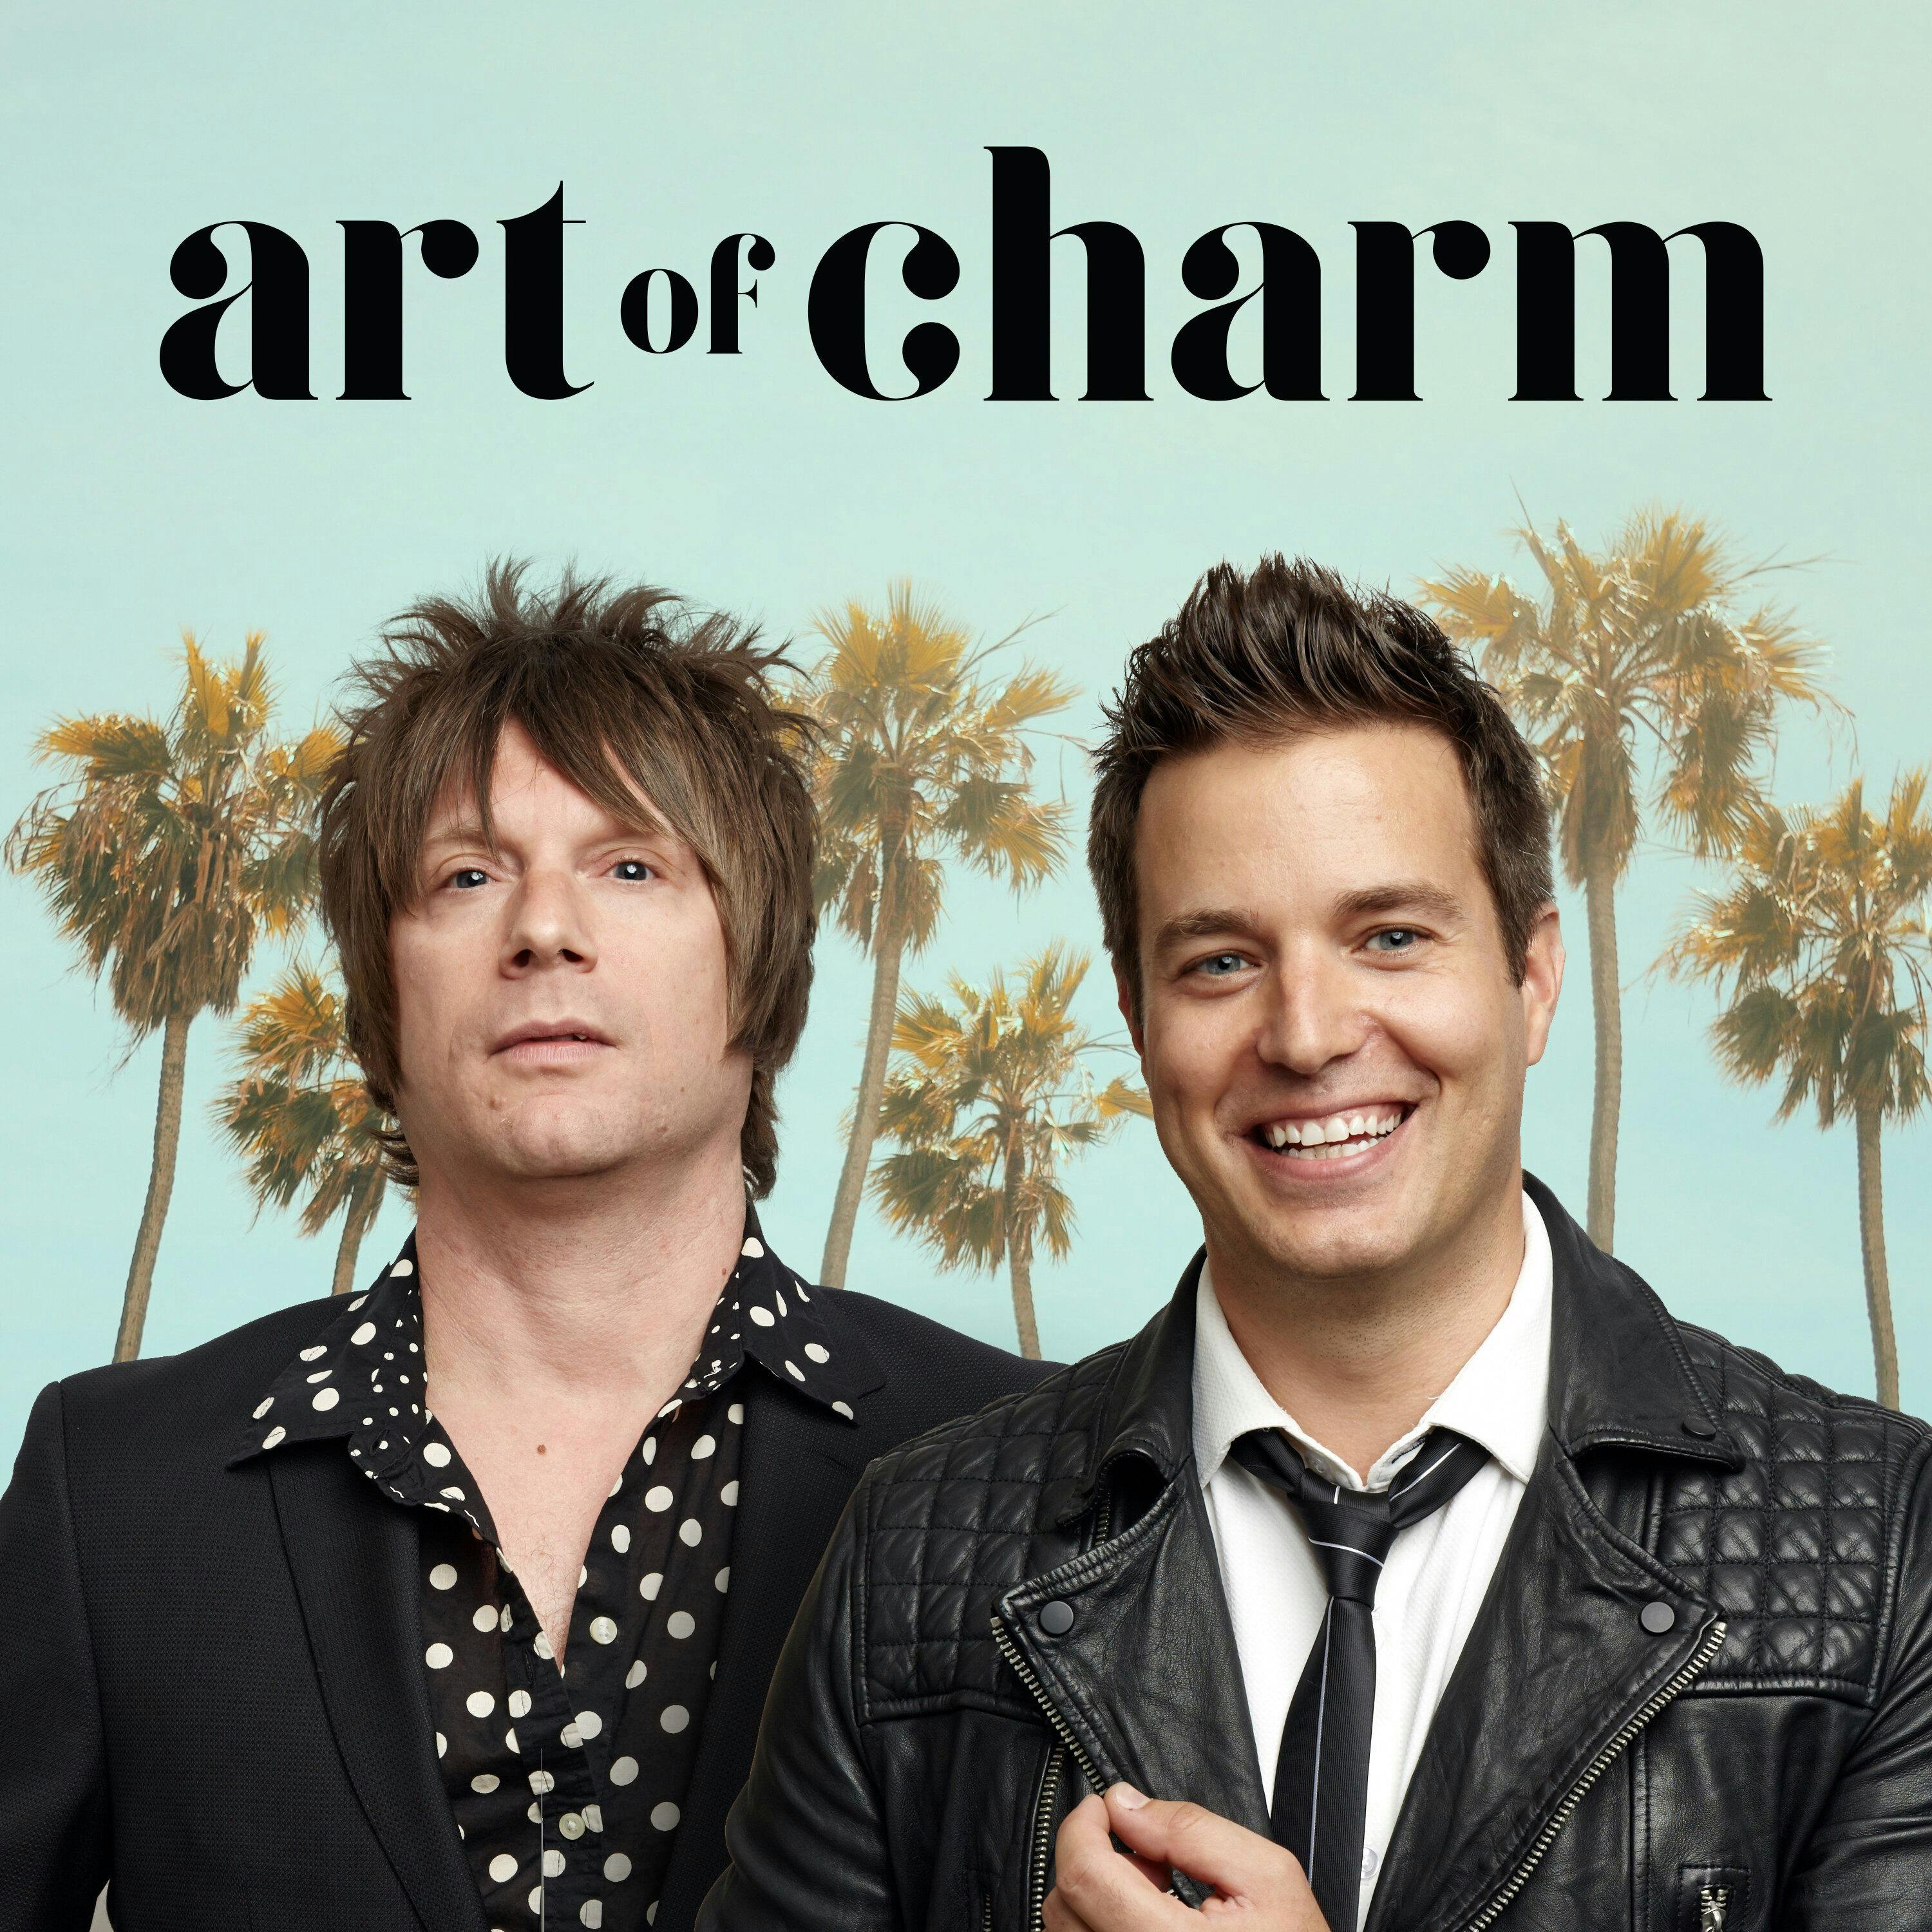 The Art of Charm podcast show image